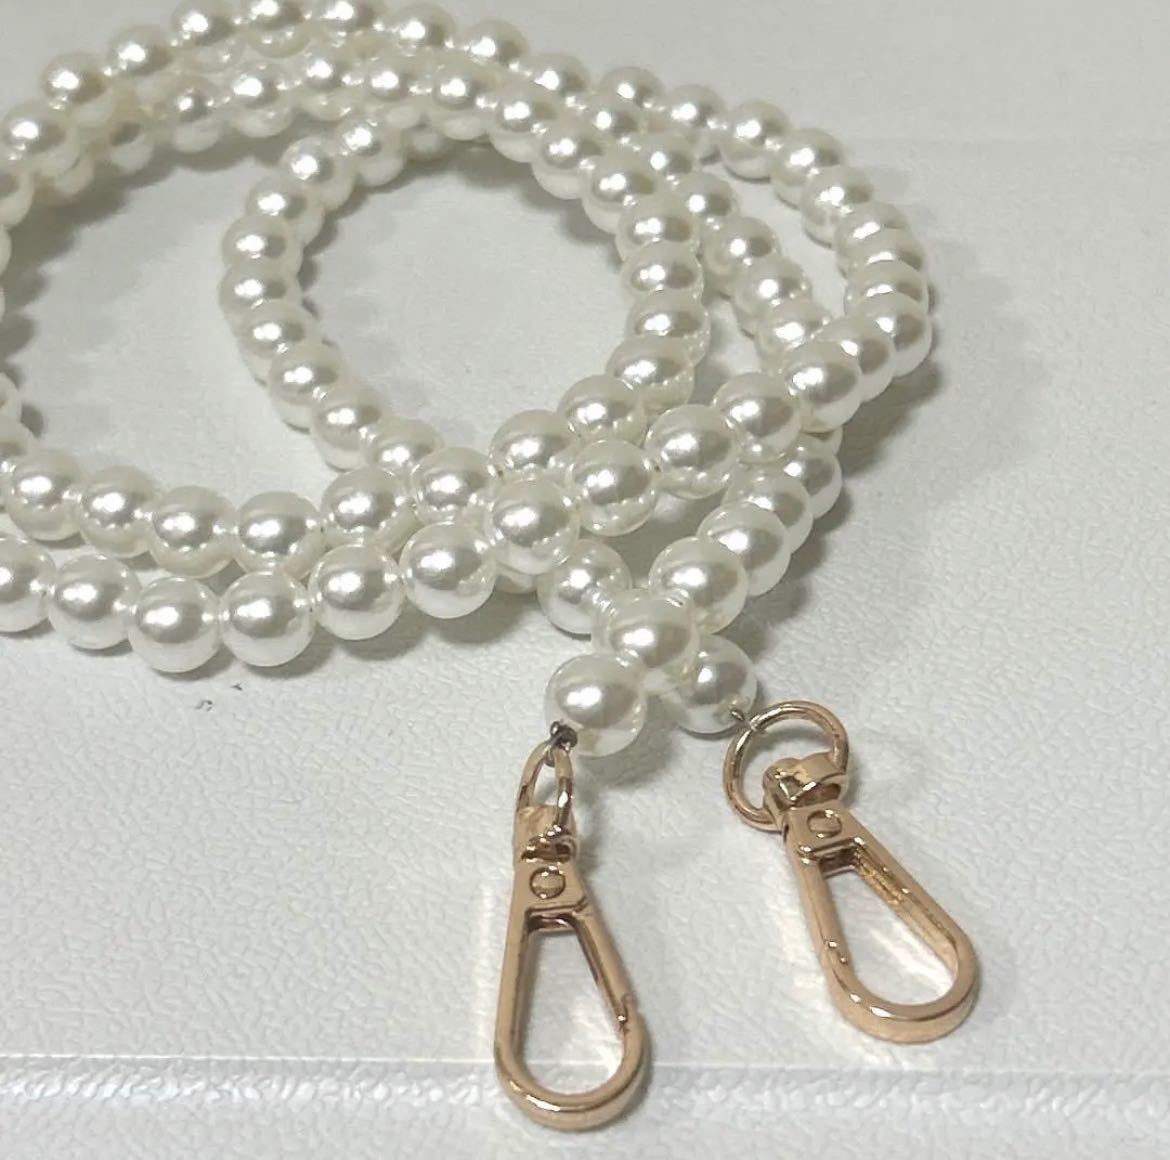  new goods unused pearl bag strap belt smartphone strap chain accessory 100cm lovely stylish Gold 